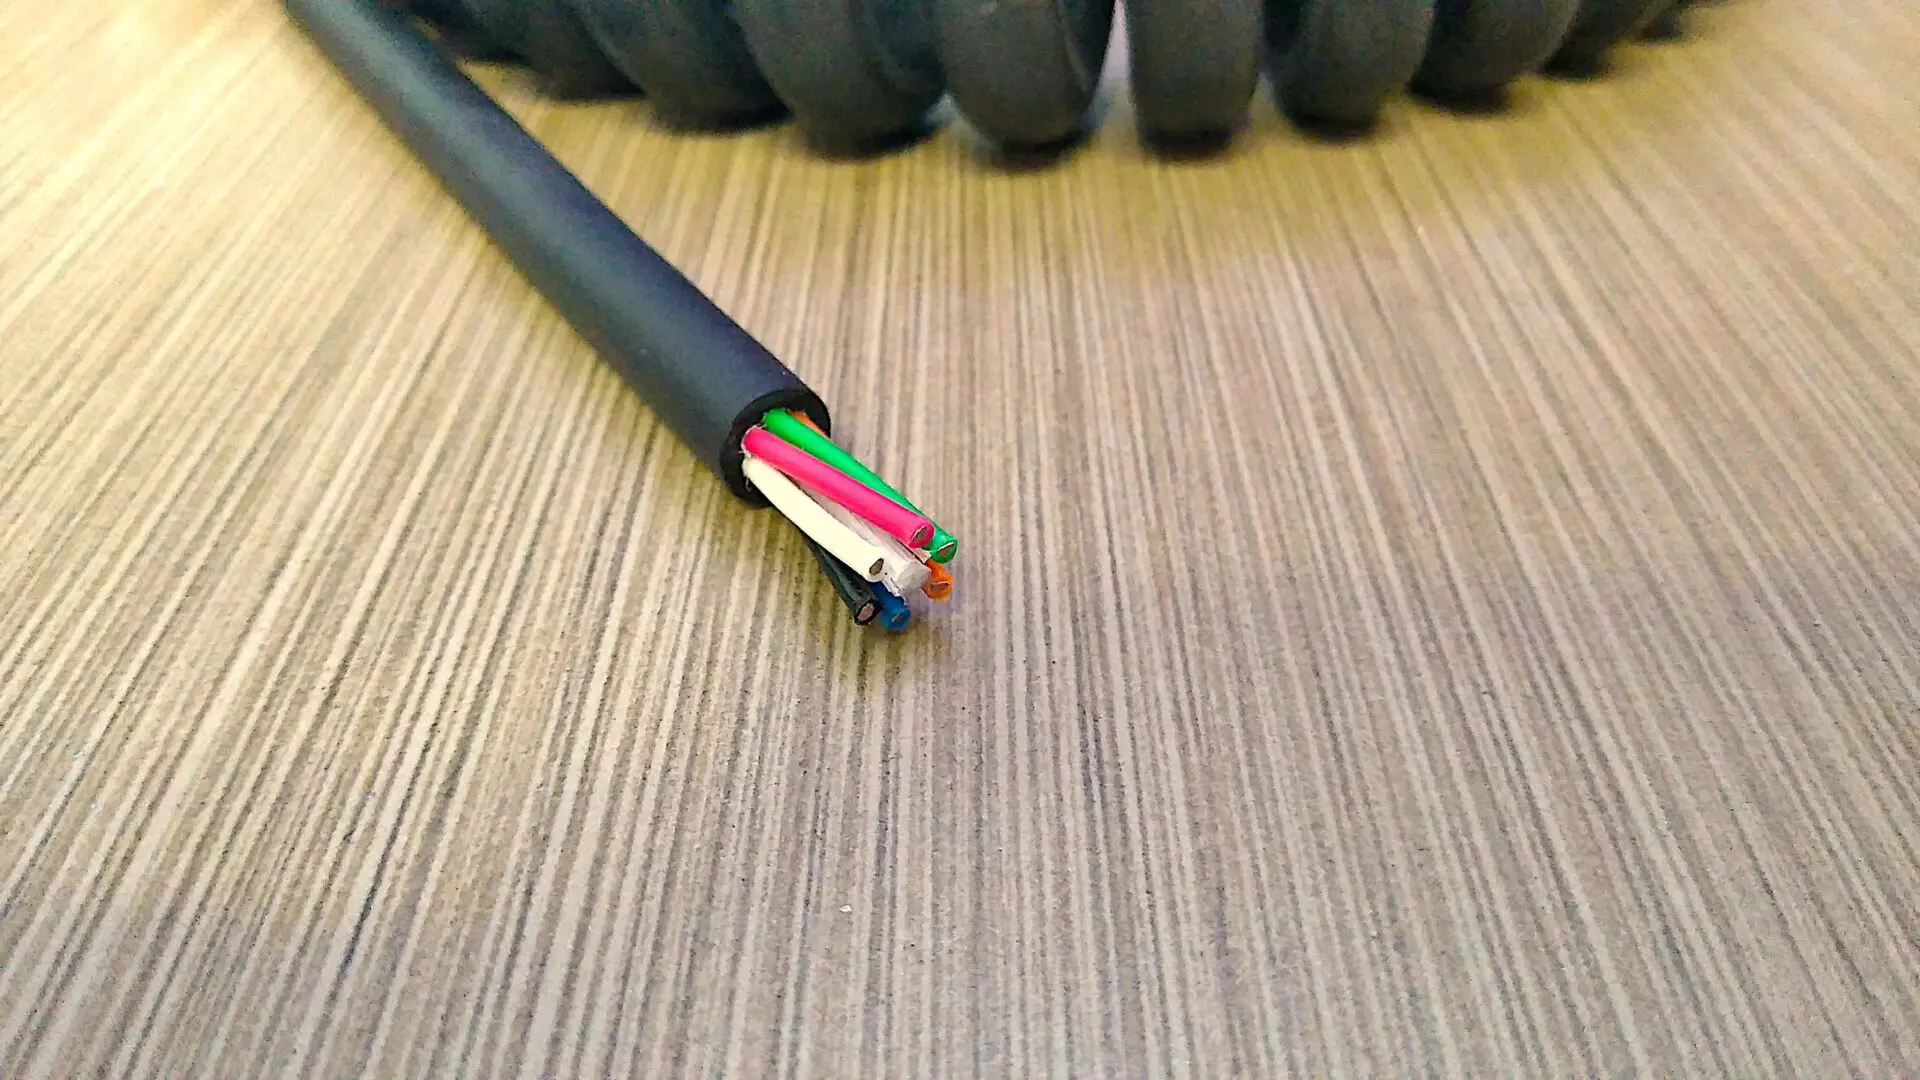 A black and white cable laying on top of a wooden table.